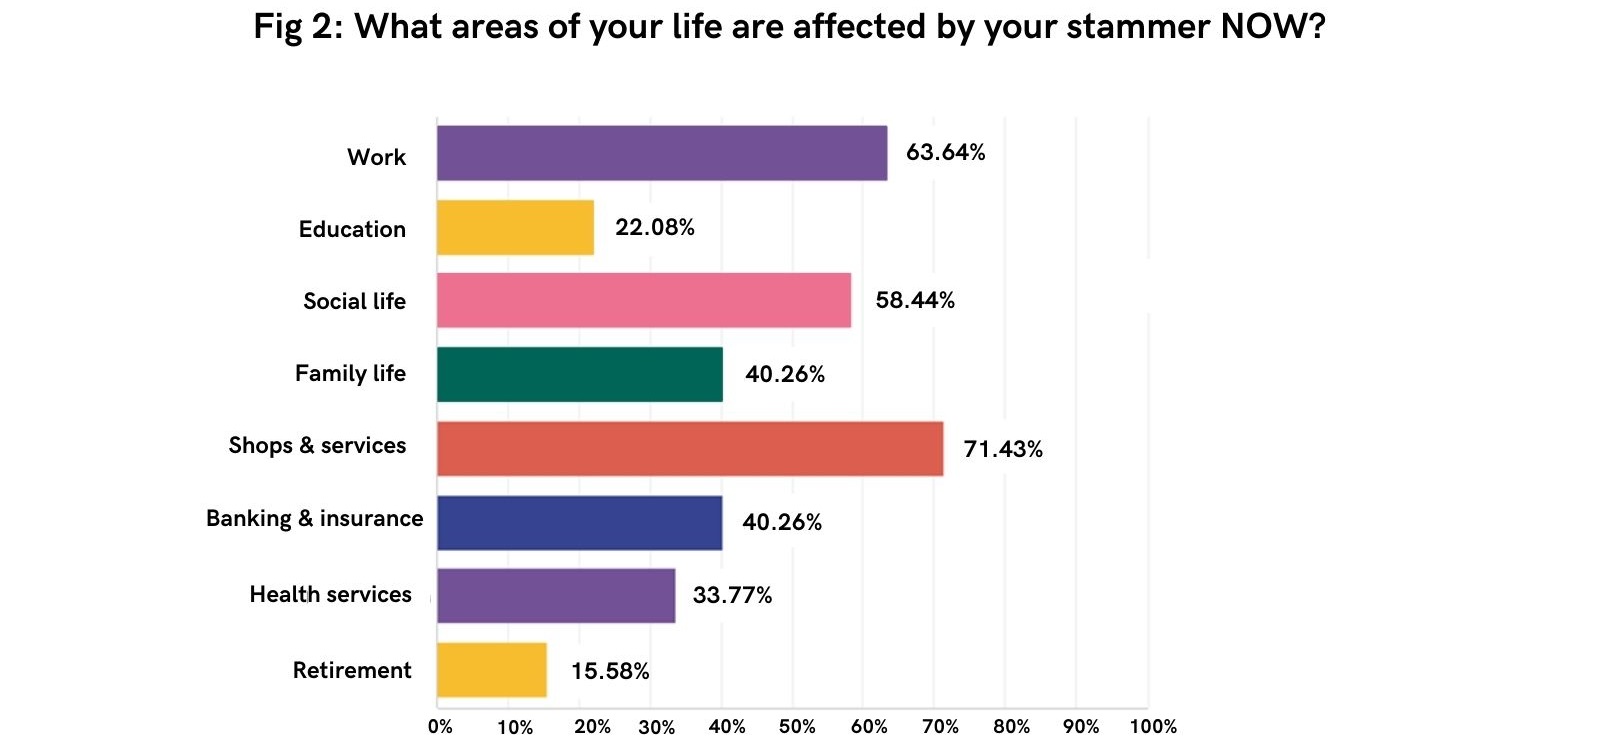 A bar graph showing areas of life affected by stammering from the 2021 survey respondents